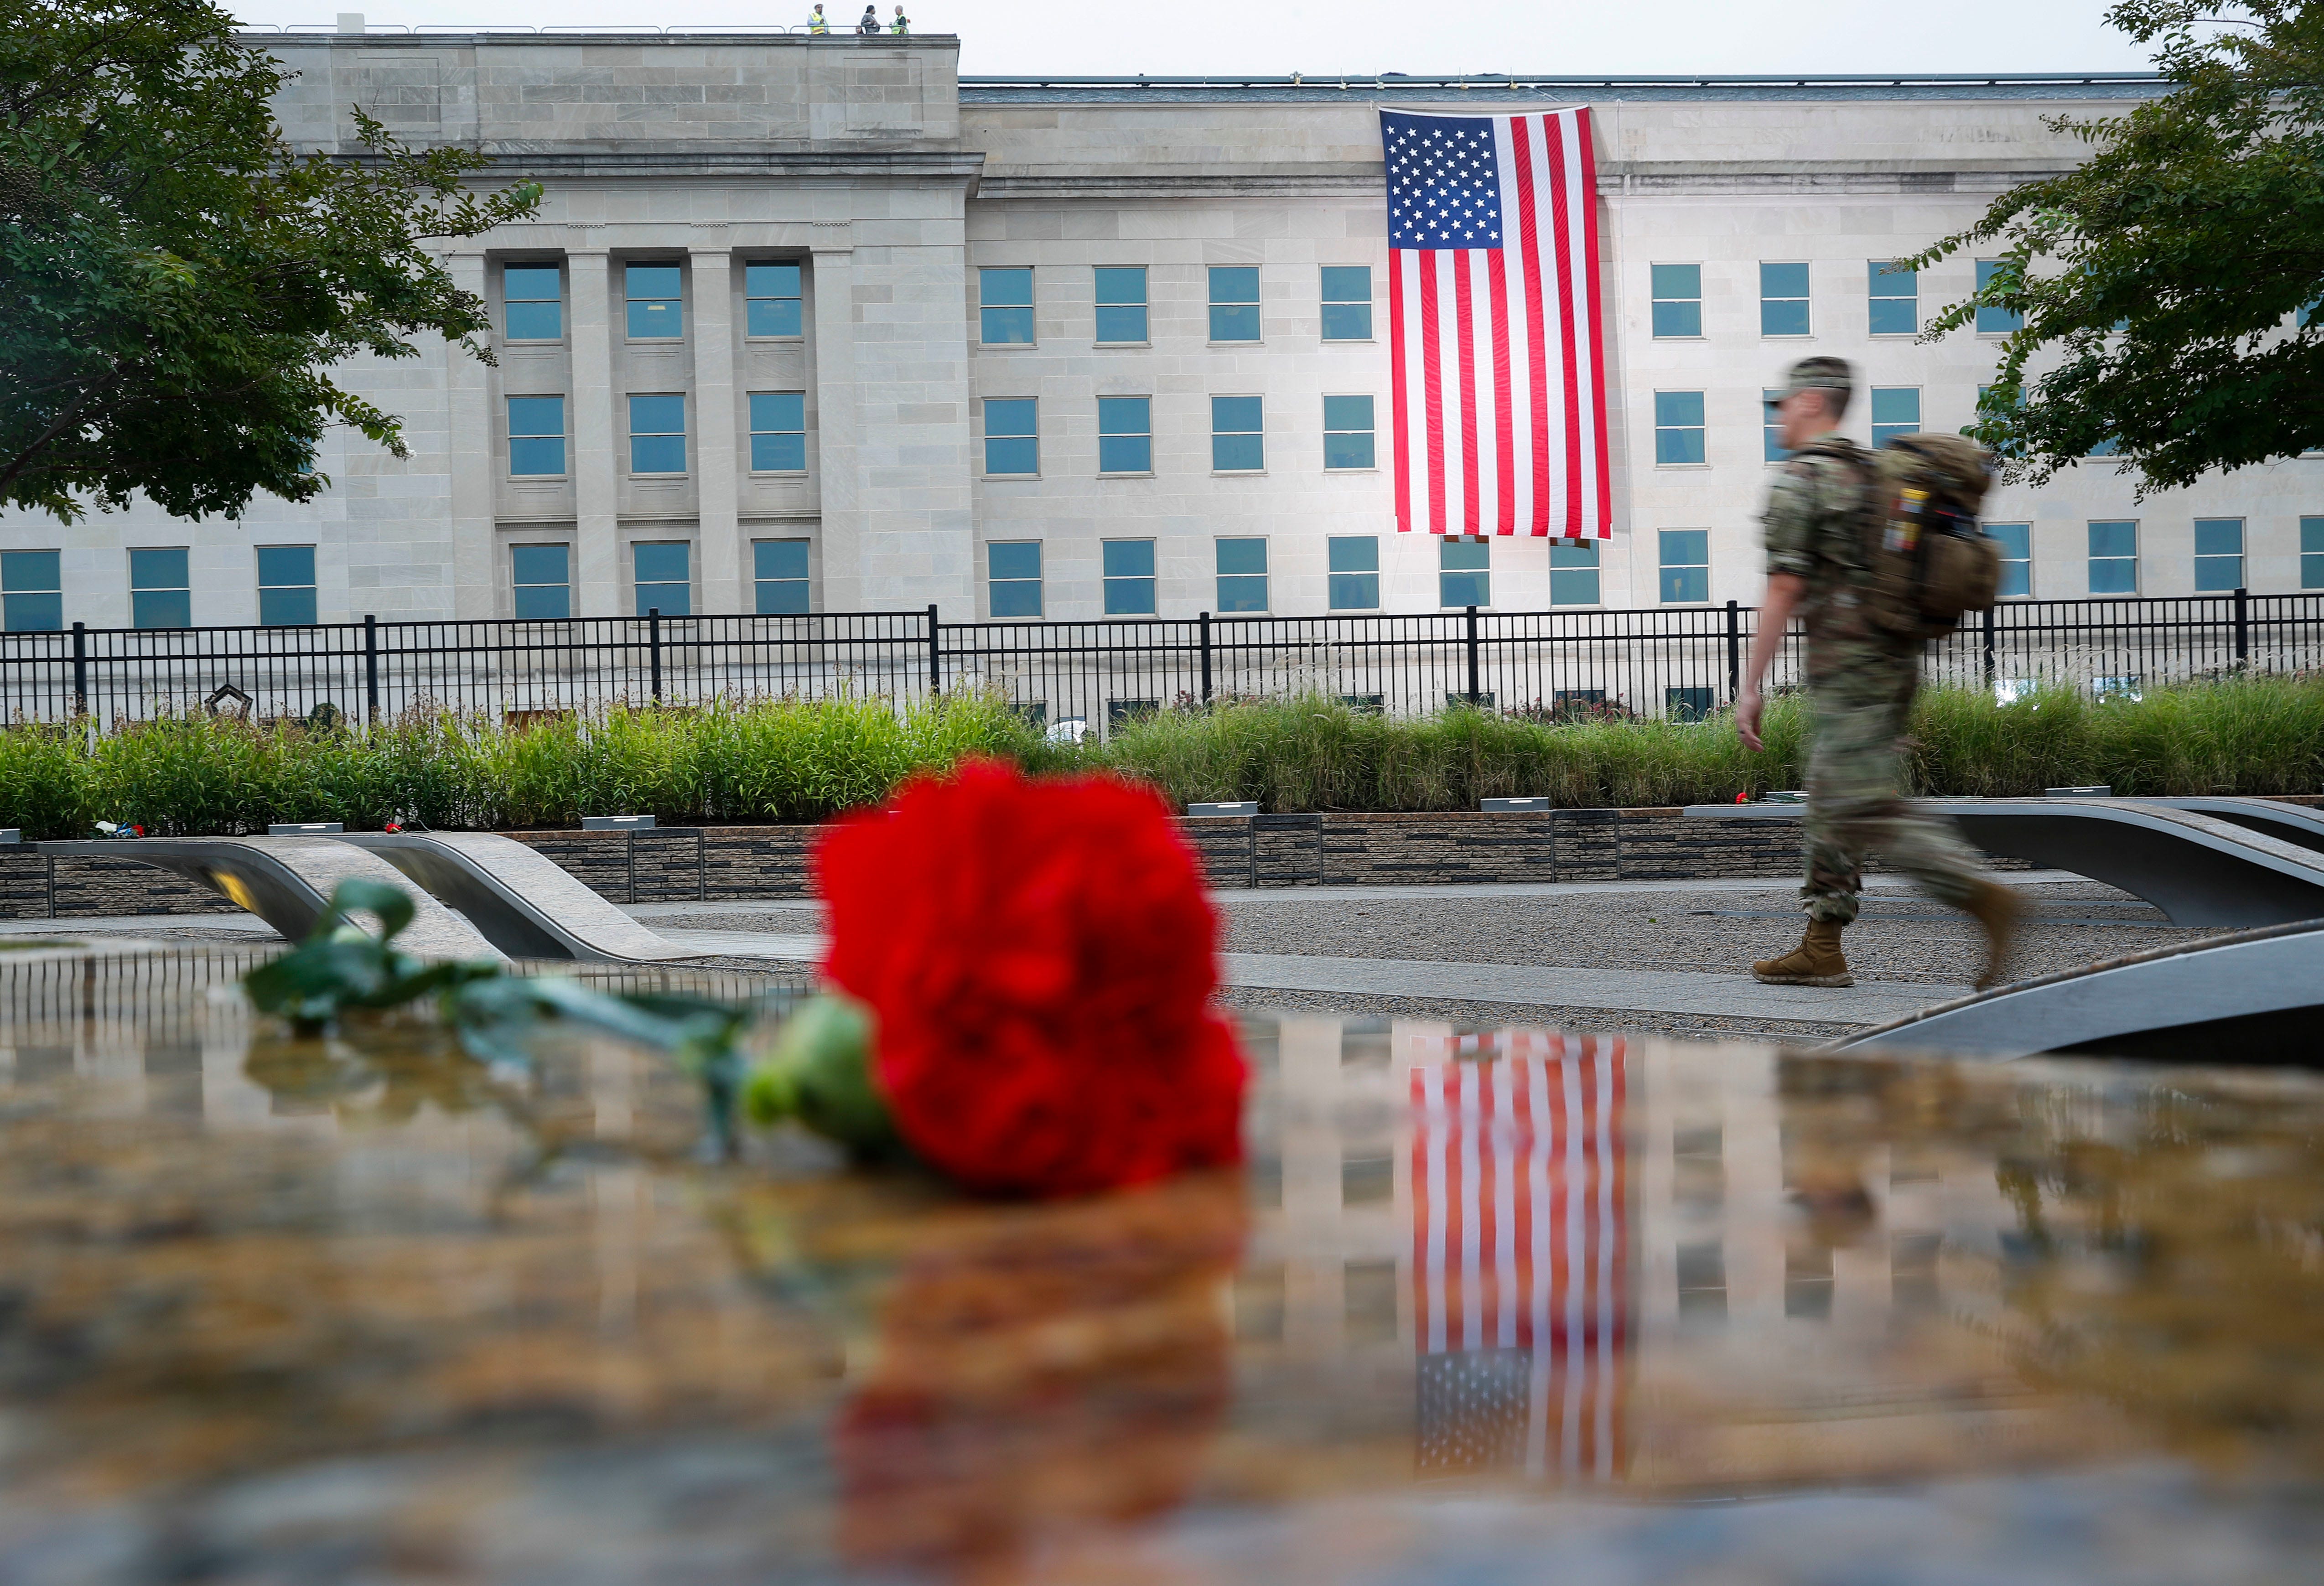 A member of the military walks the grounds of the National 9/11 Pentagon Memorial before the start of the September 11th Pentagon Memorial Observance at the Pentagon on the 17th anniversary of the September 11th attacks, Sept. 11, 2018.